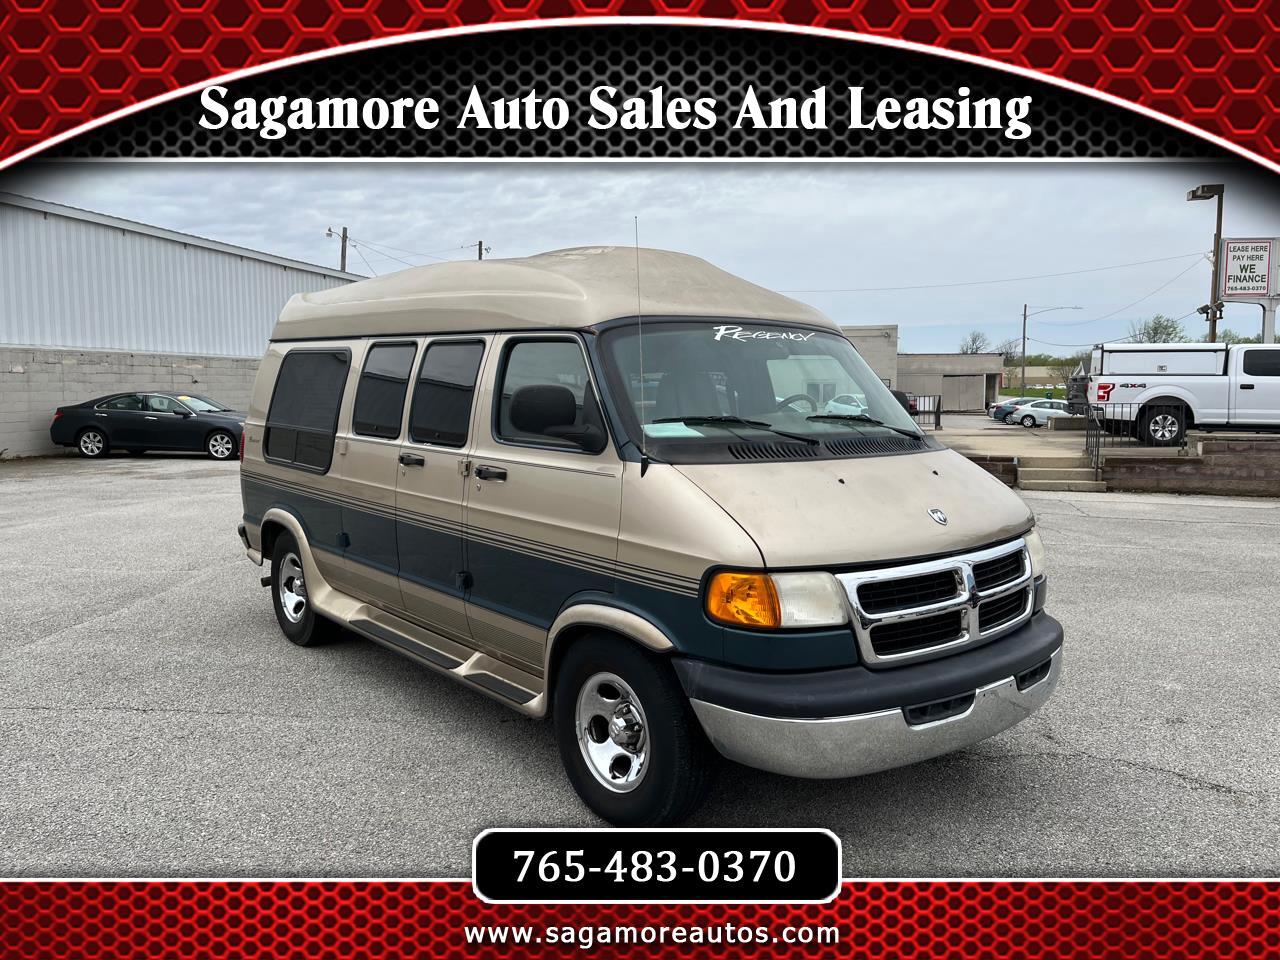 Used 2003 Dodge Ram Van 1500 127" WB Conversion for Sale in Lebanon IN  46052 Sagamore Auto Sales And Leasing